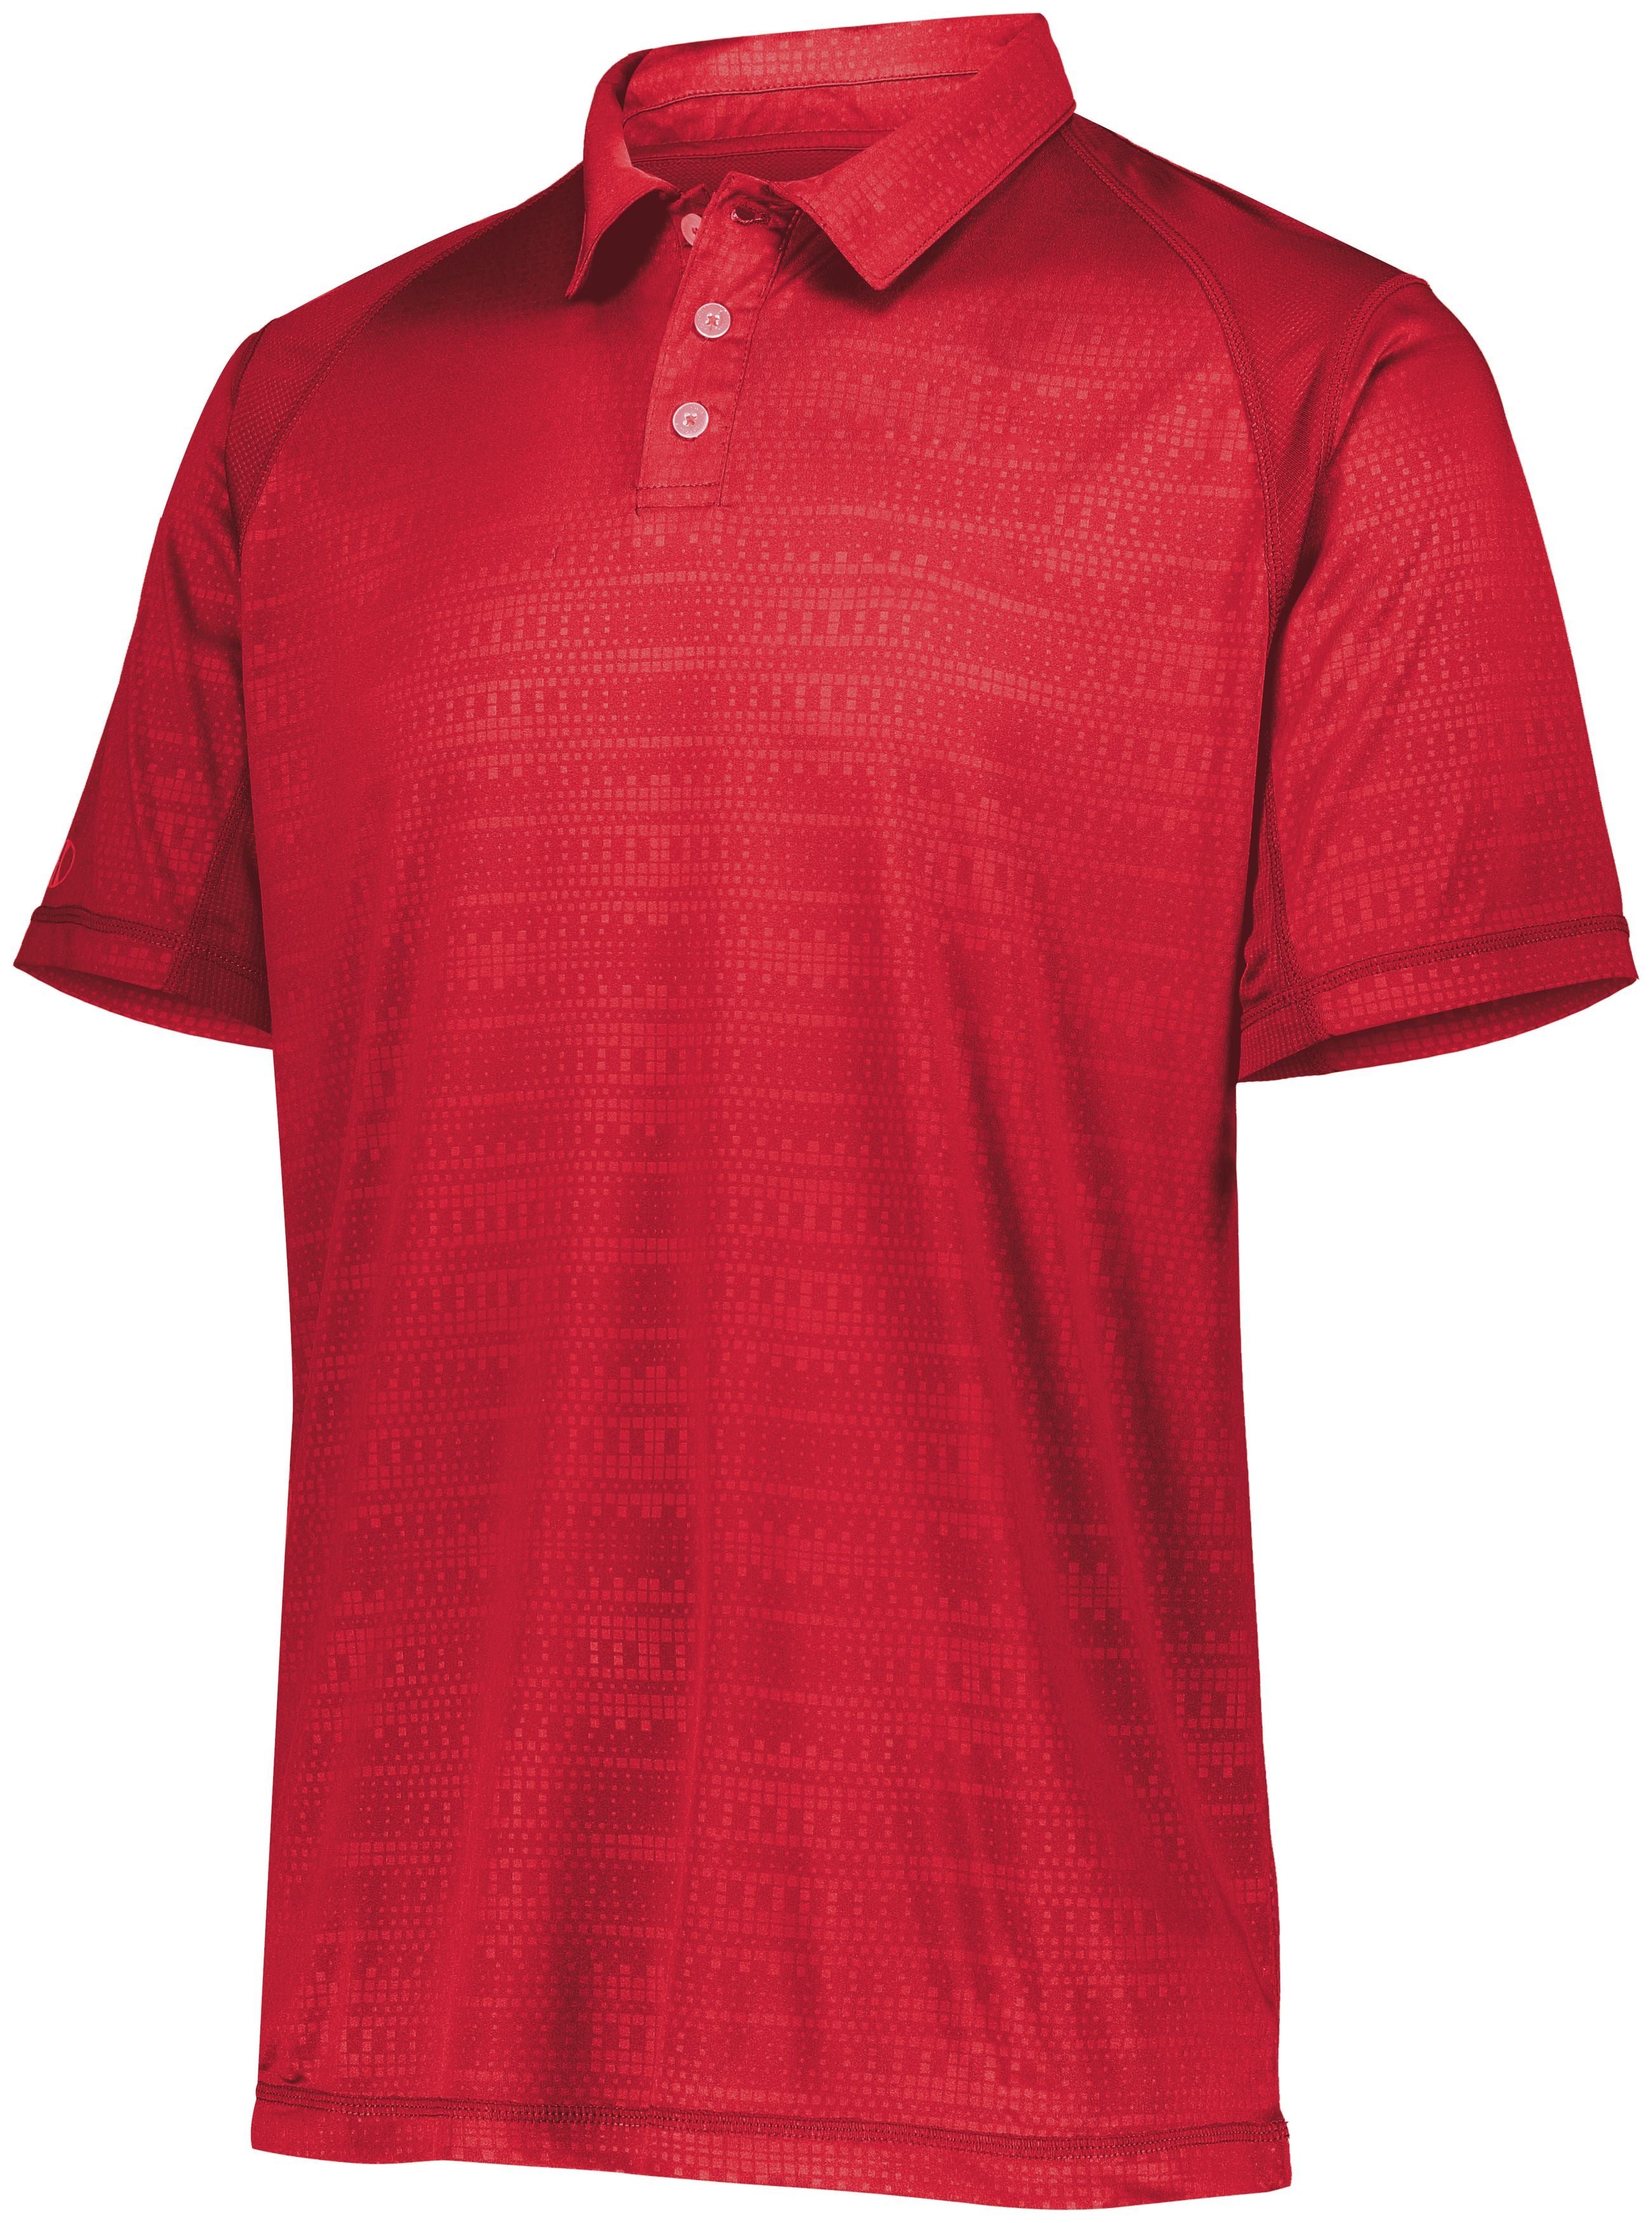 Holloway Converge Polo in Scarlet  -Part of the Adult, Adult-Polos, Polos, Holloway, Shirts, Converge-Collection product lines at KanaleyCreations.com